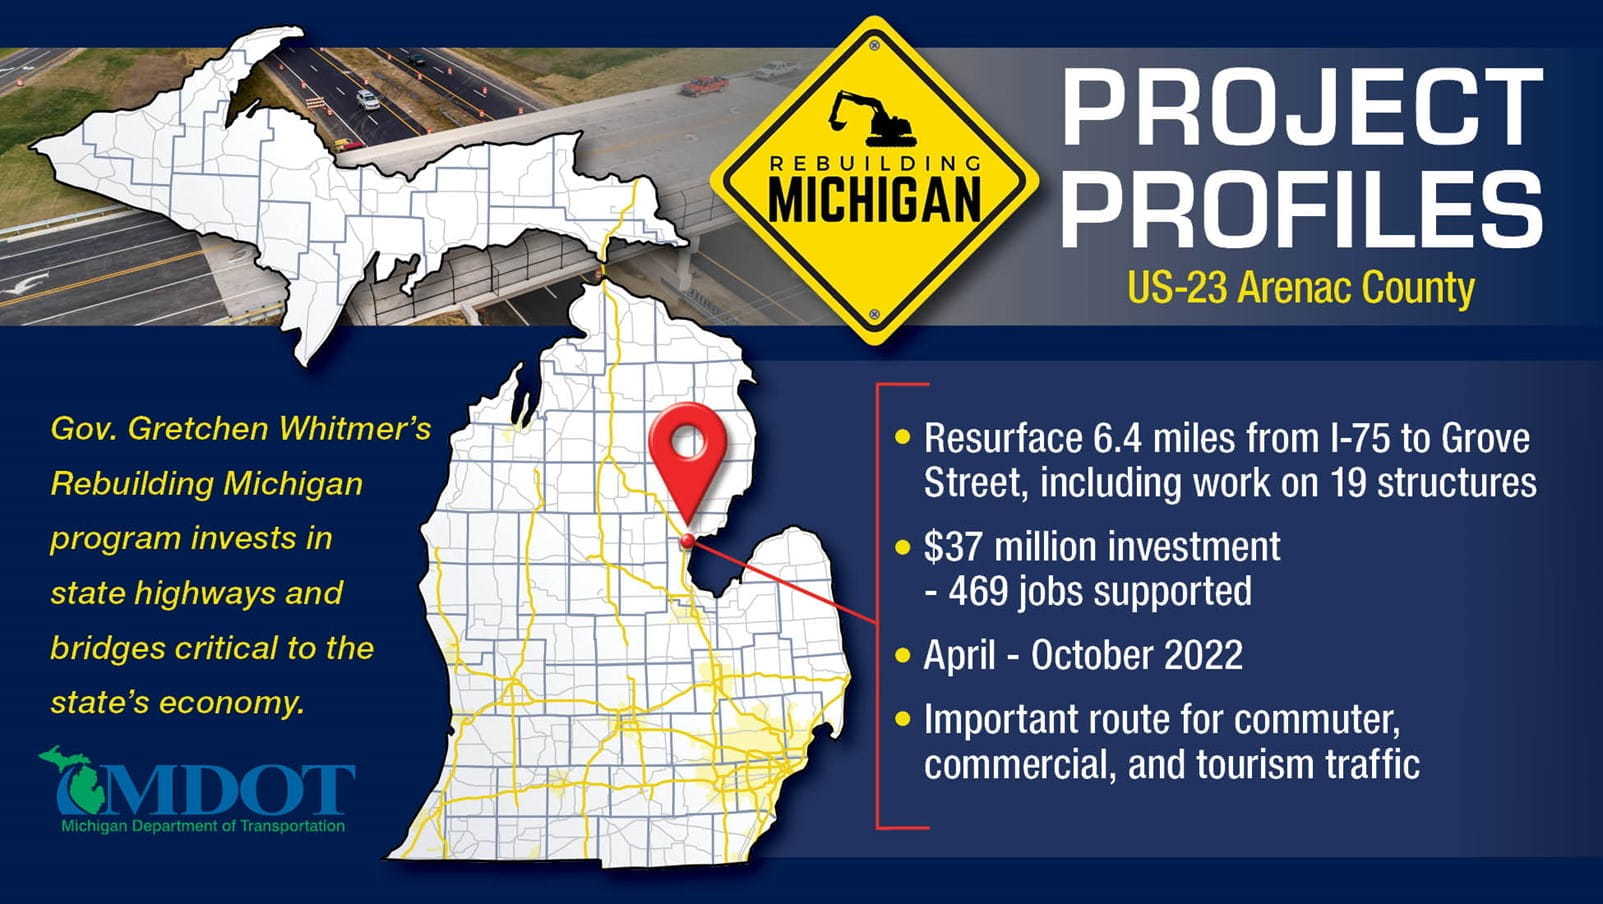 Project profile image of the US-23 Arenac County project 